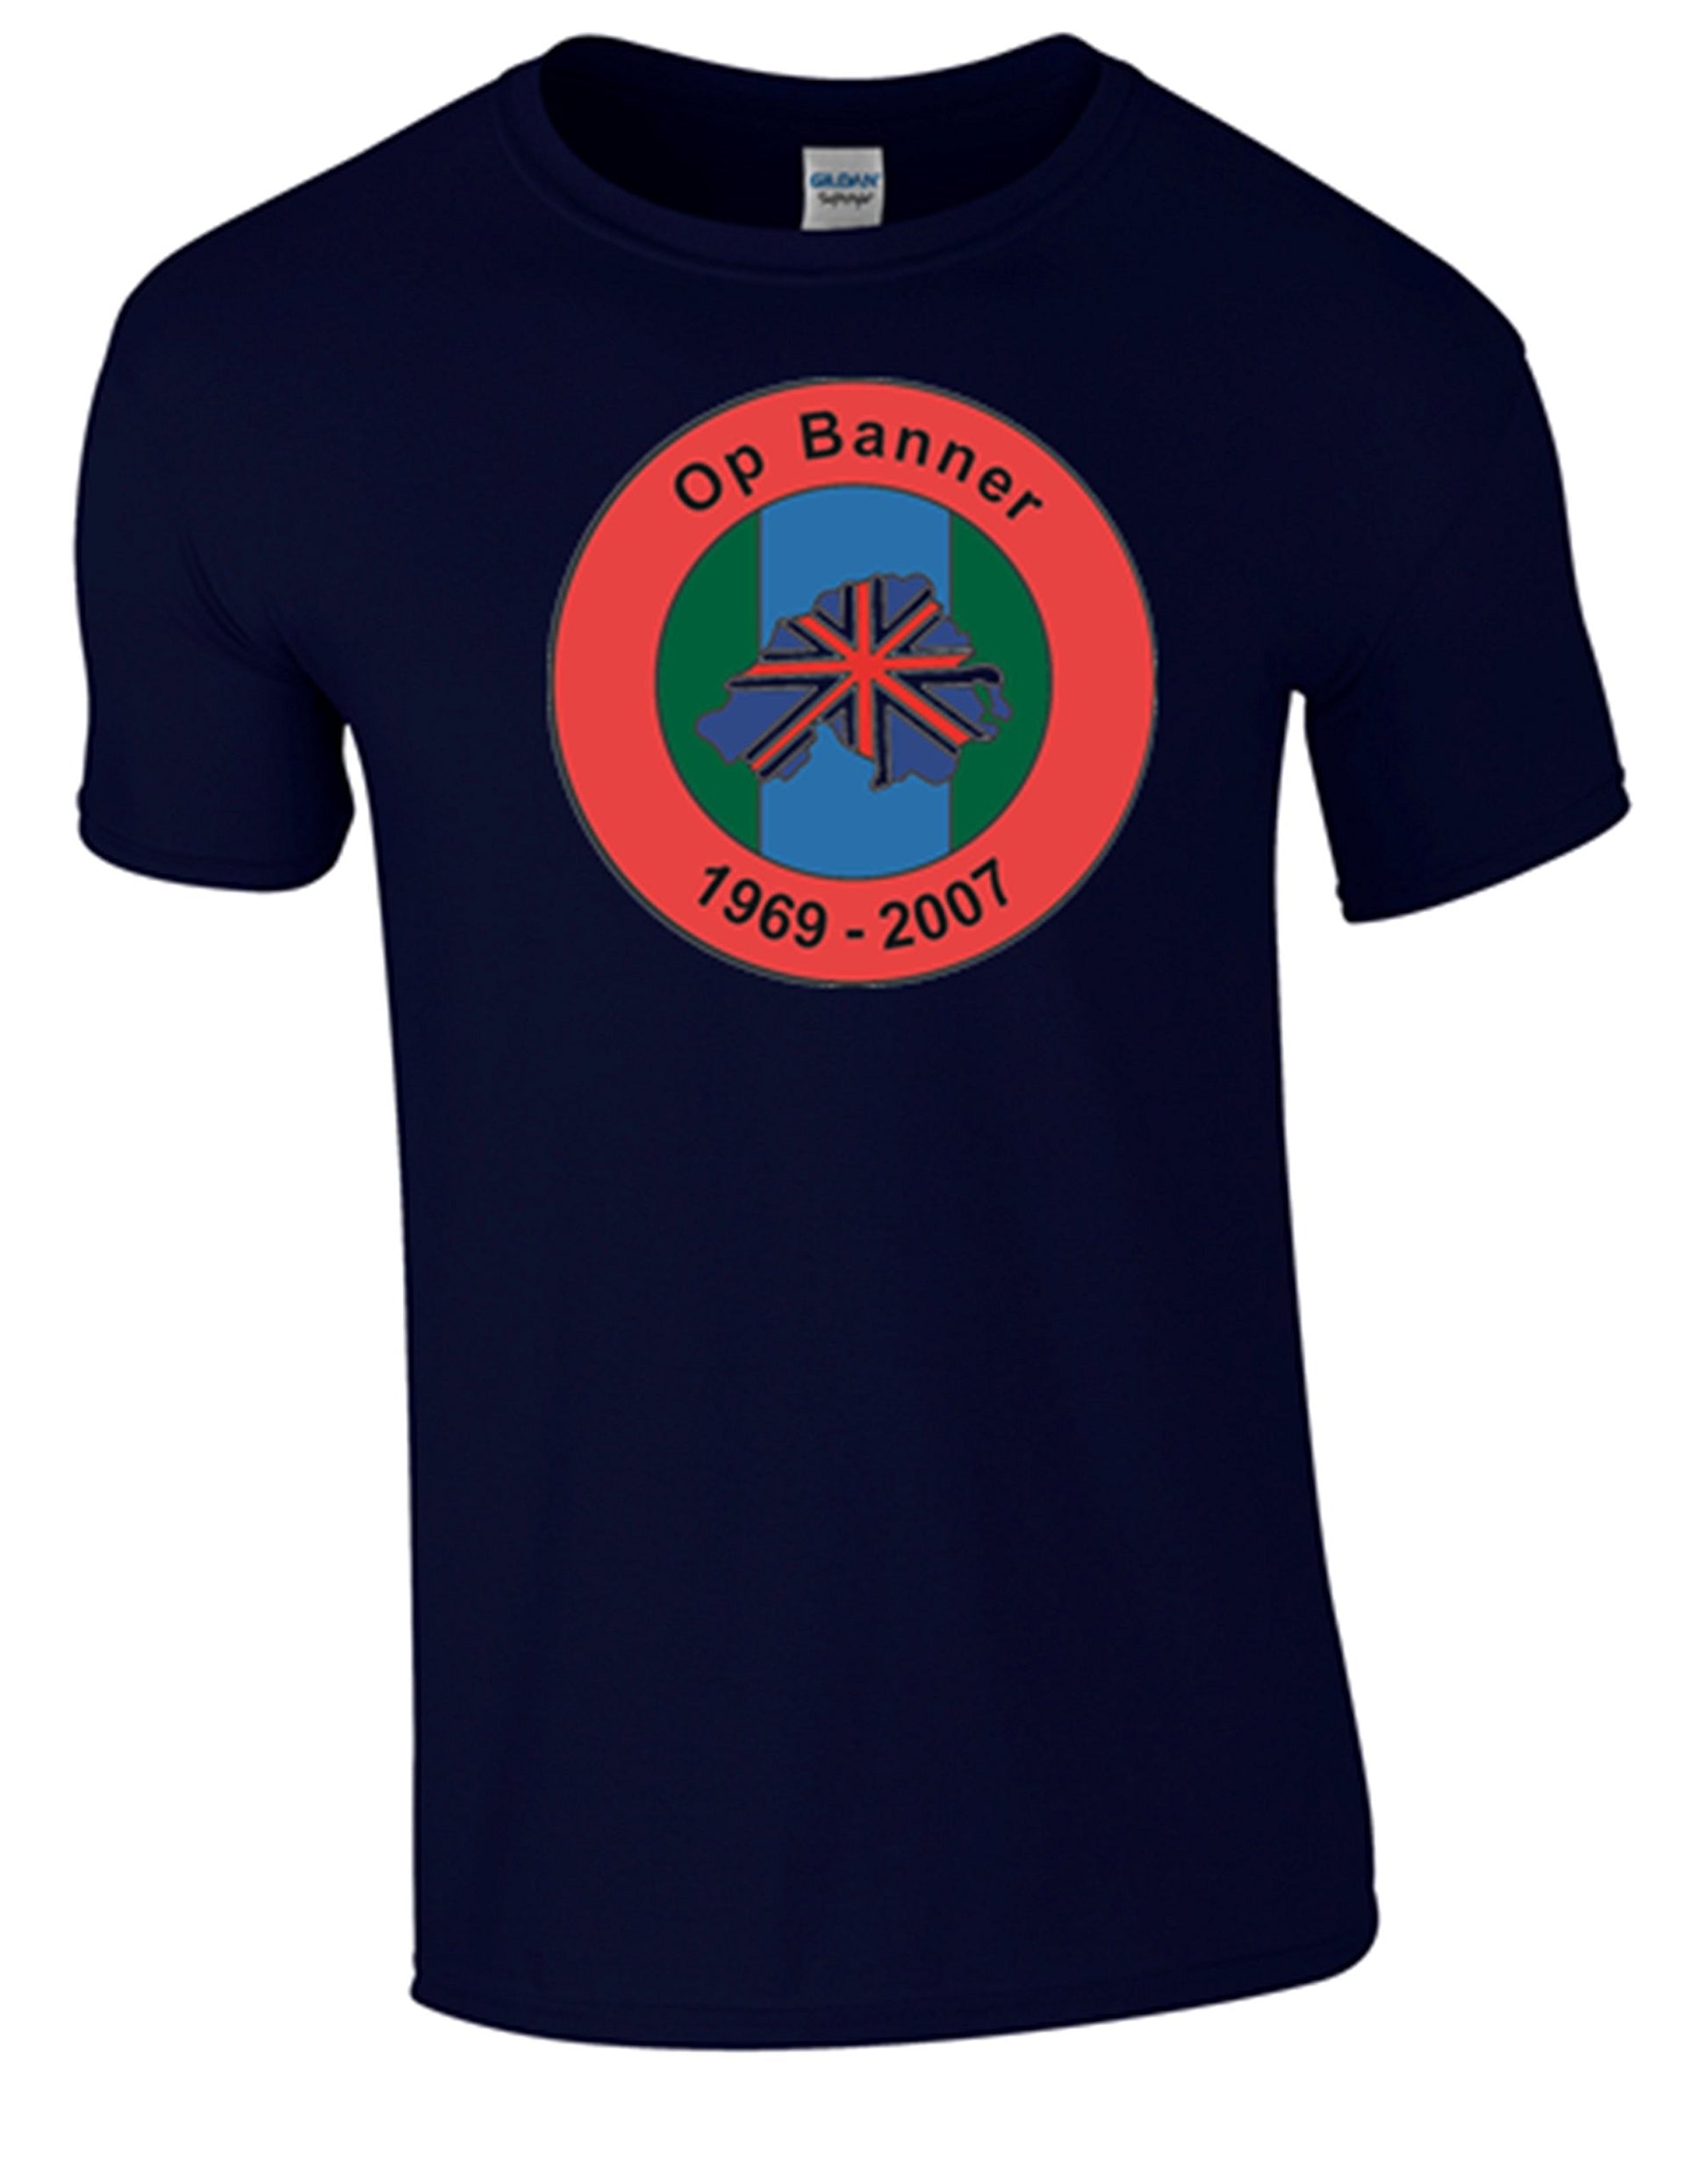 Bear Essentials Clothing. Northern Ireland Ops Banner T-Shirt (XXL, Blue) - Army 1157 kit Army 1157 Kit